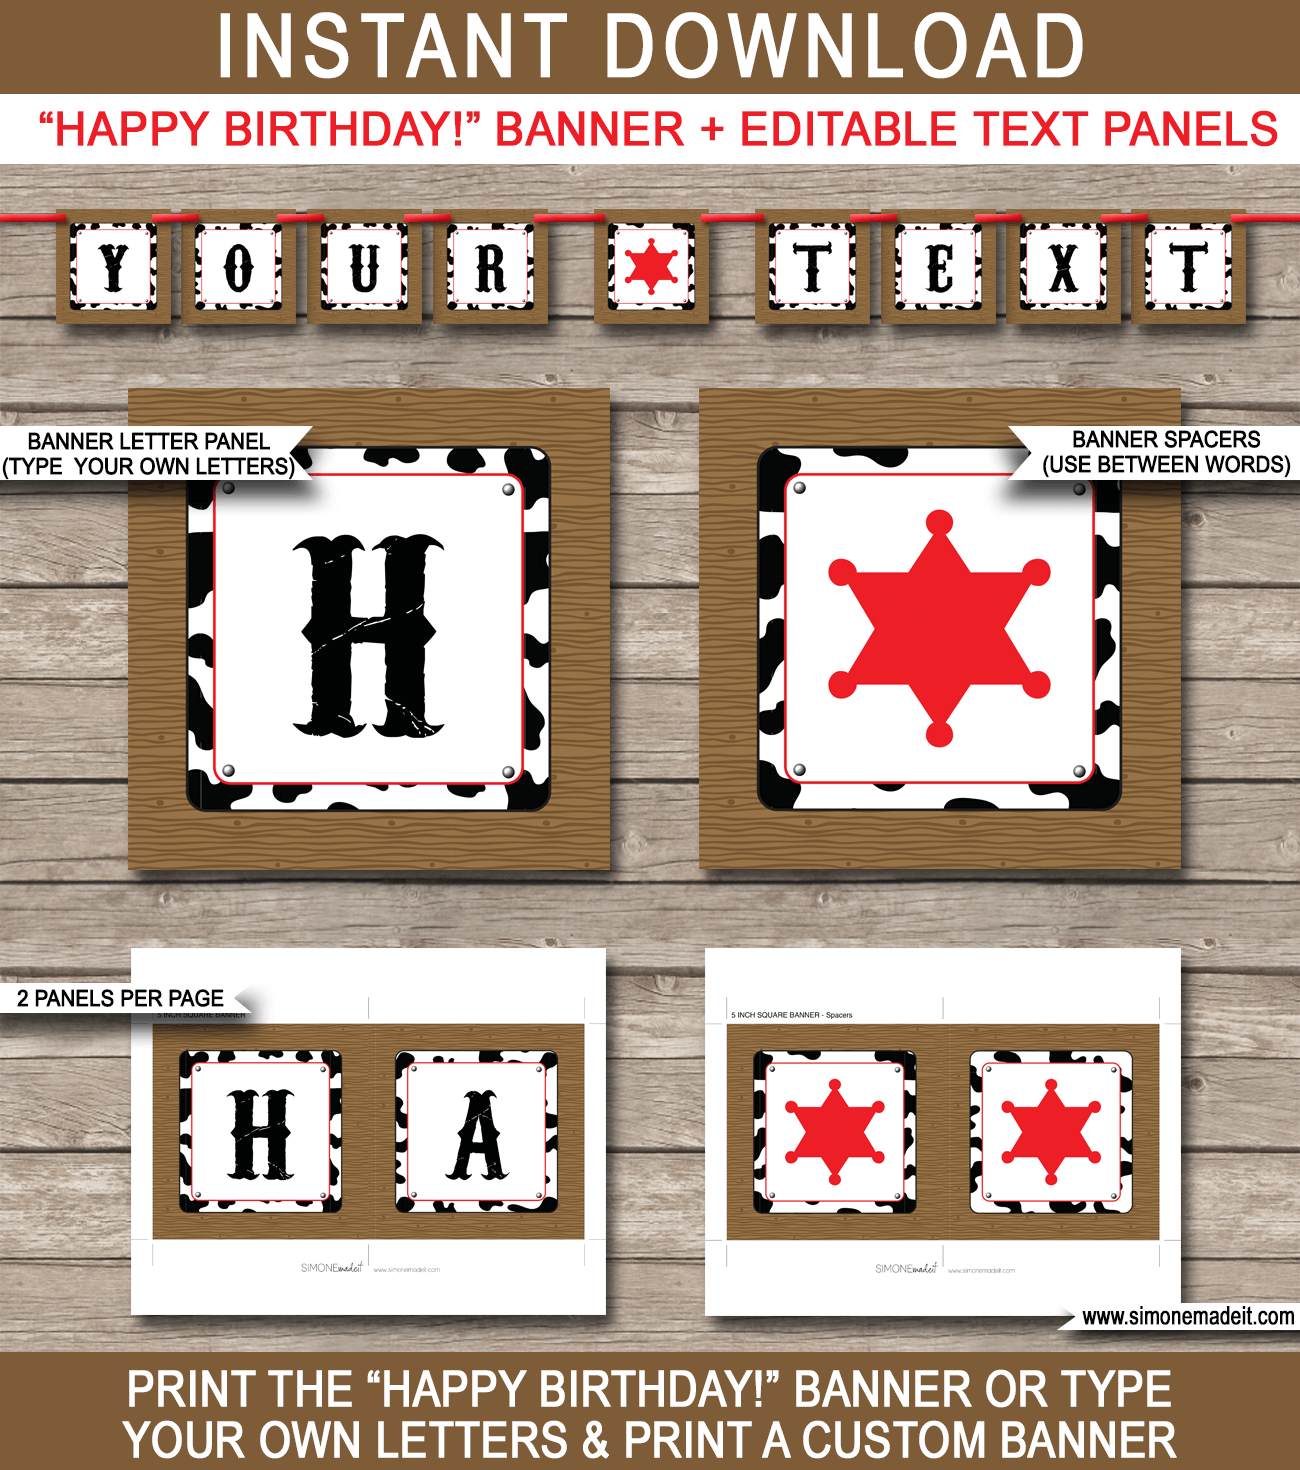 Cowboy Party Banner Template - Cowboy Bunting - Happy Birthday Banner - Birthday Party - Editable and Printable DIY Template - INSTANT DOWNLOAD $4.50 via simonemadeit.com